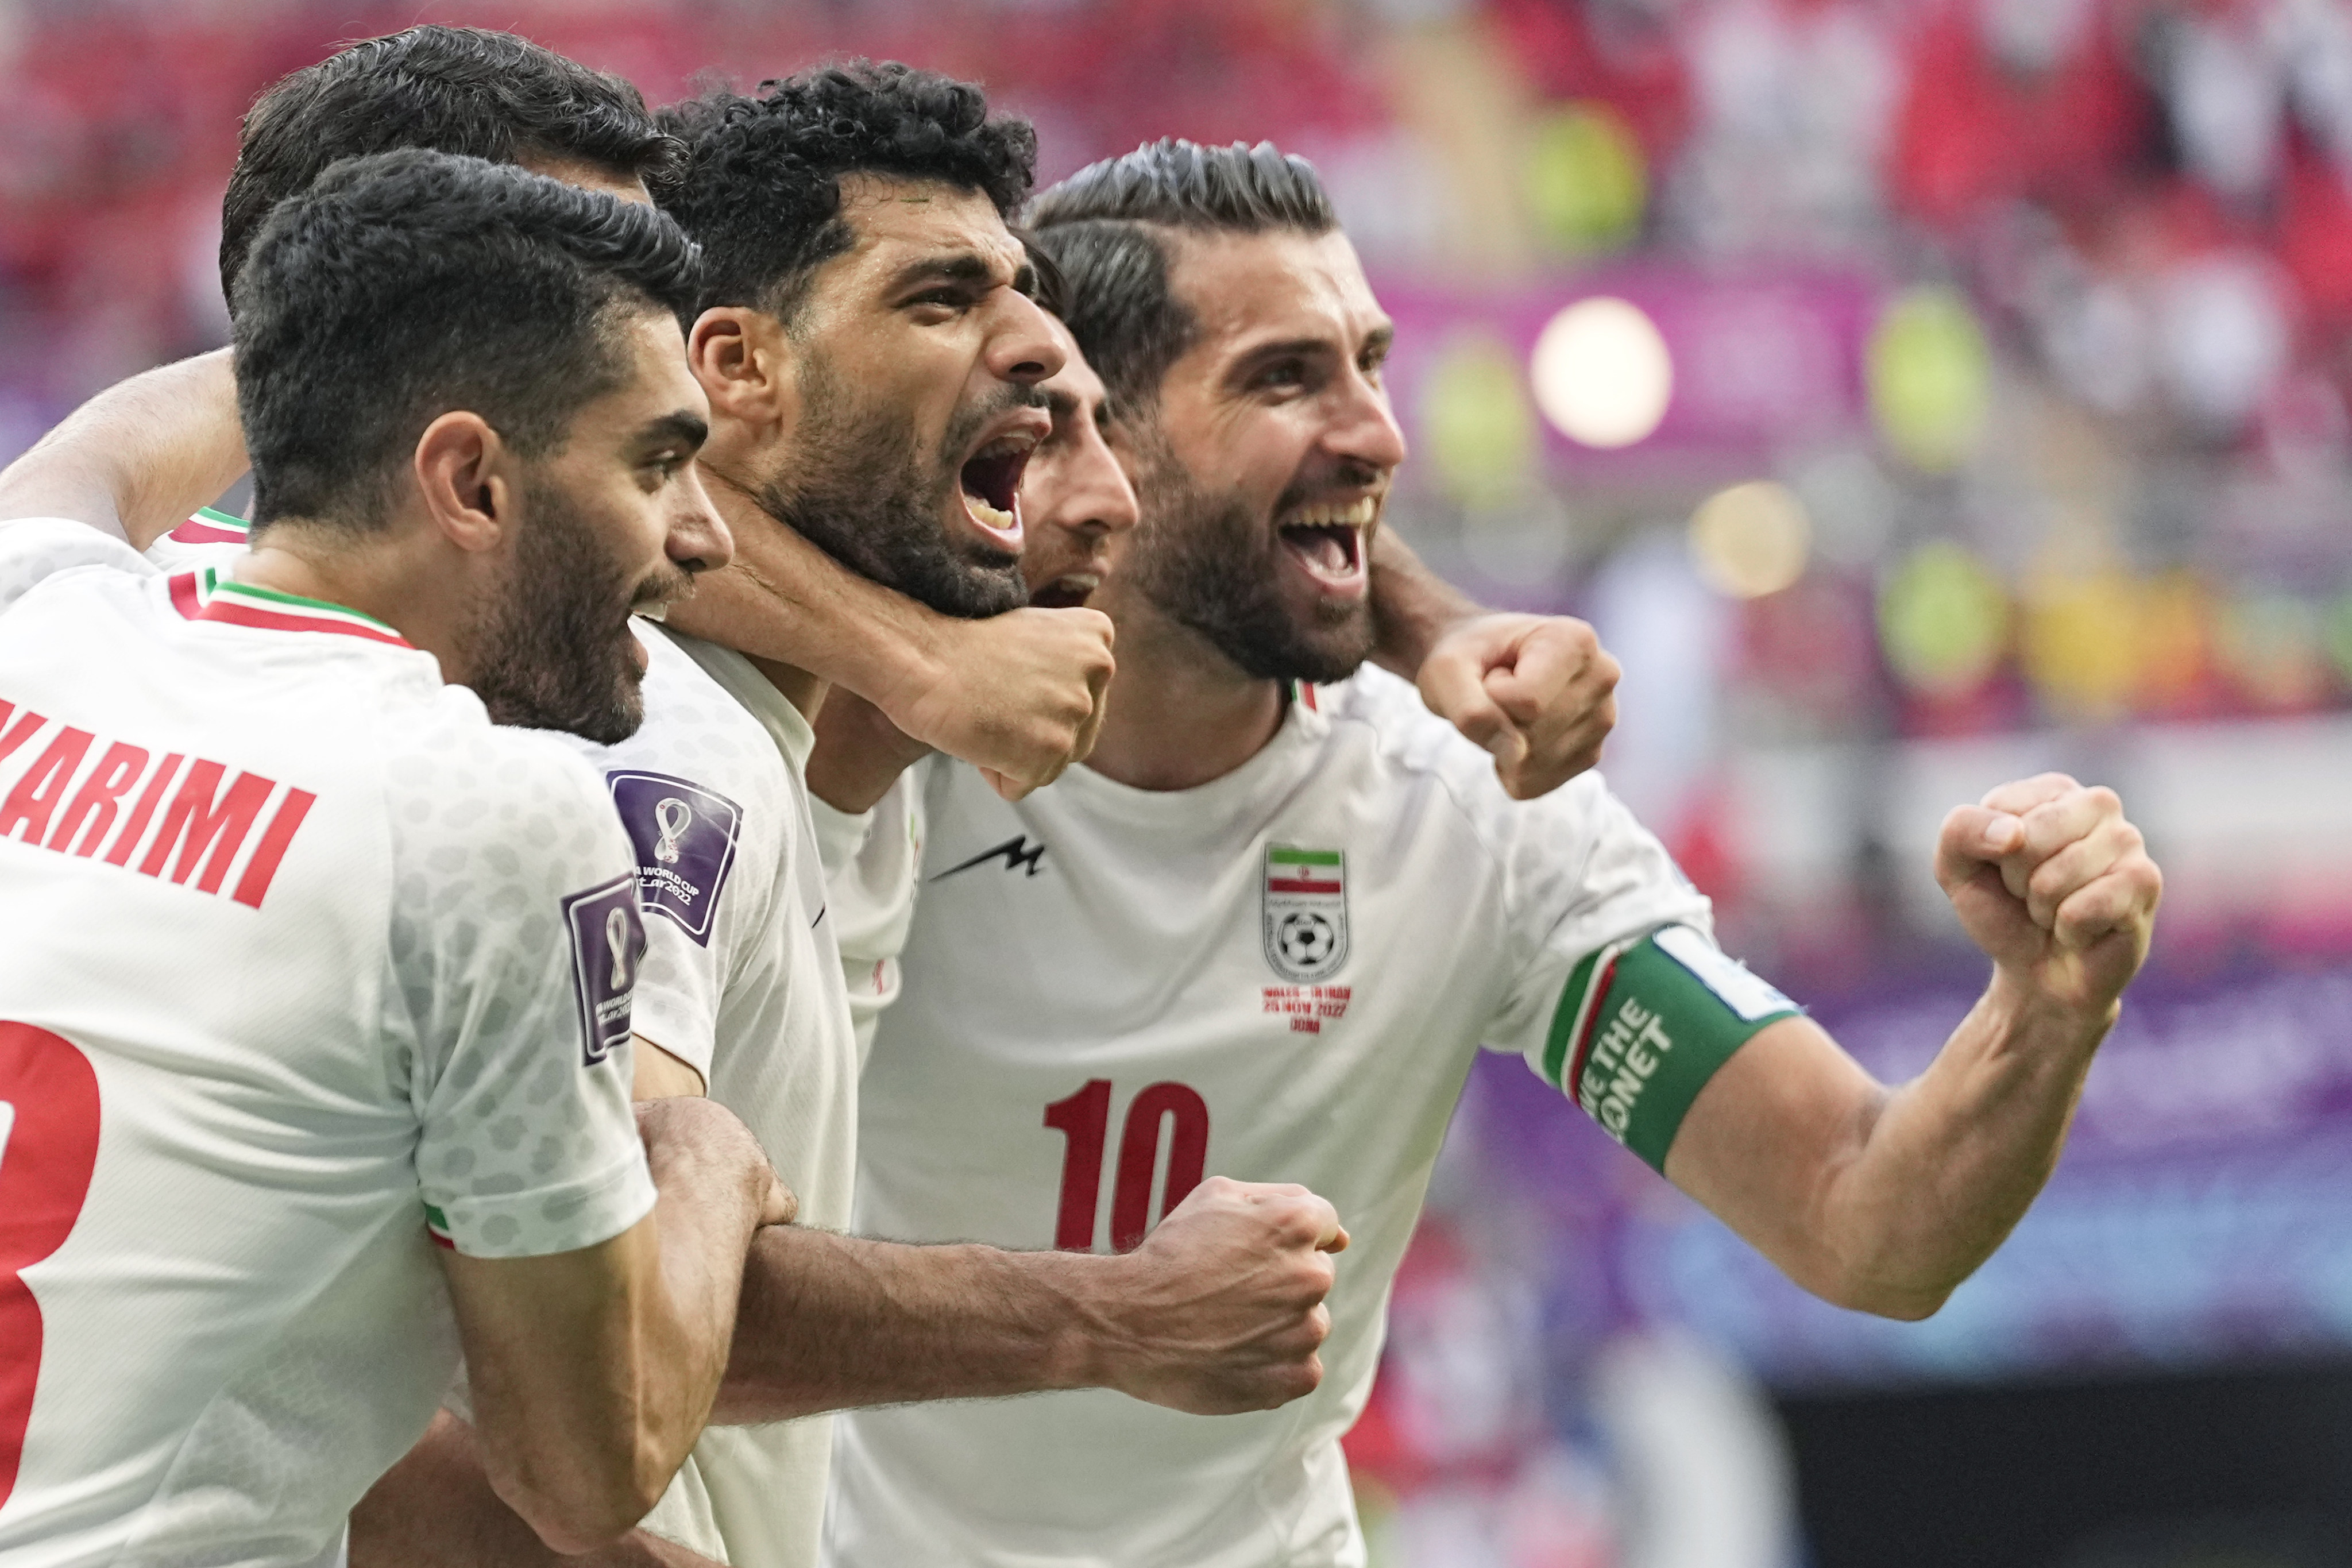 Fifa World Cup 2022: Iran 'fight for the people' in Wales win – 'we tried to make them happy' | South China Morning Post